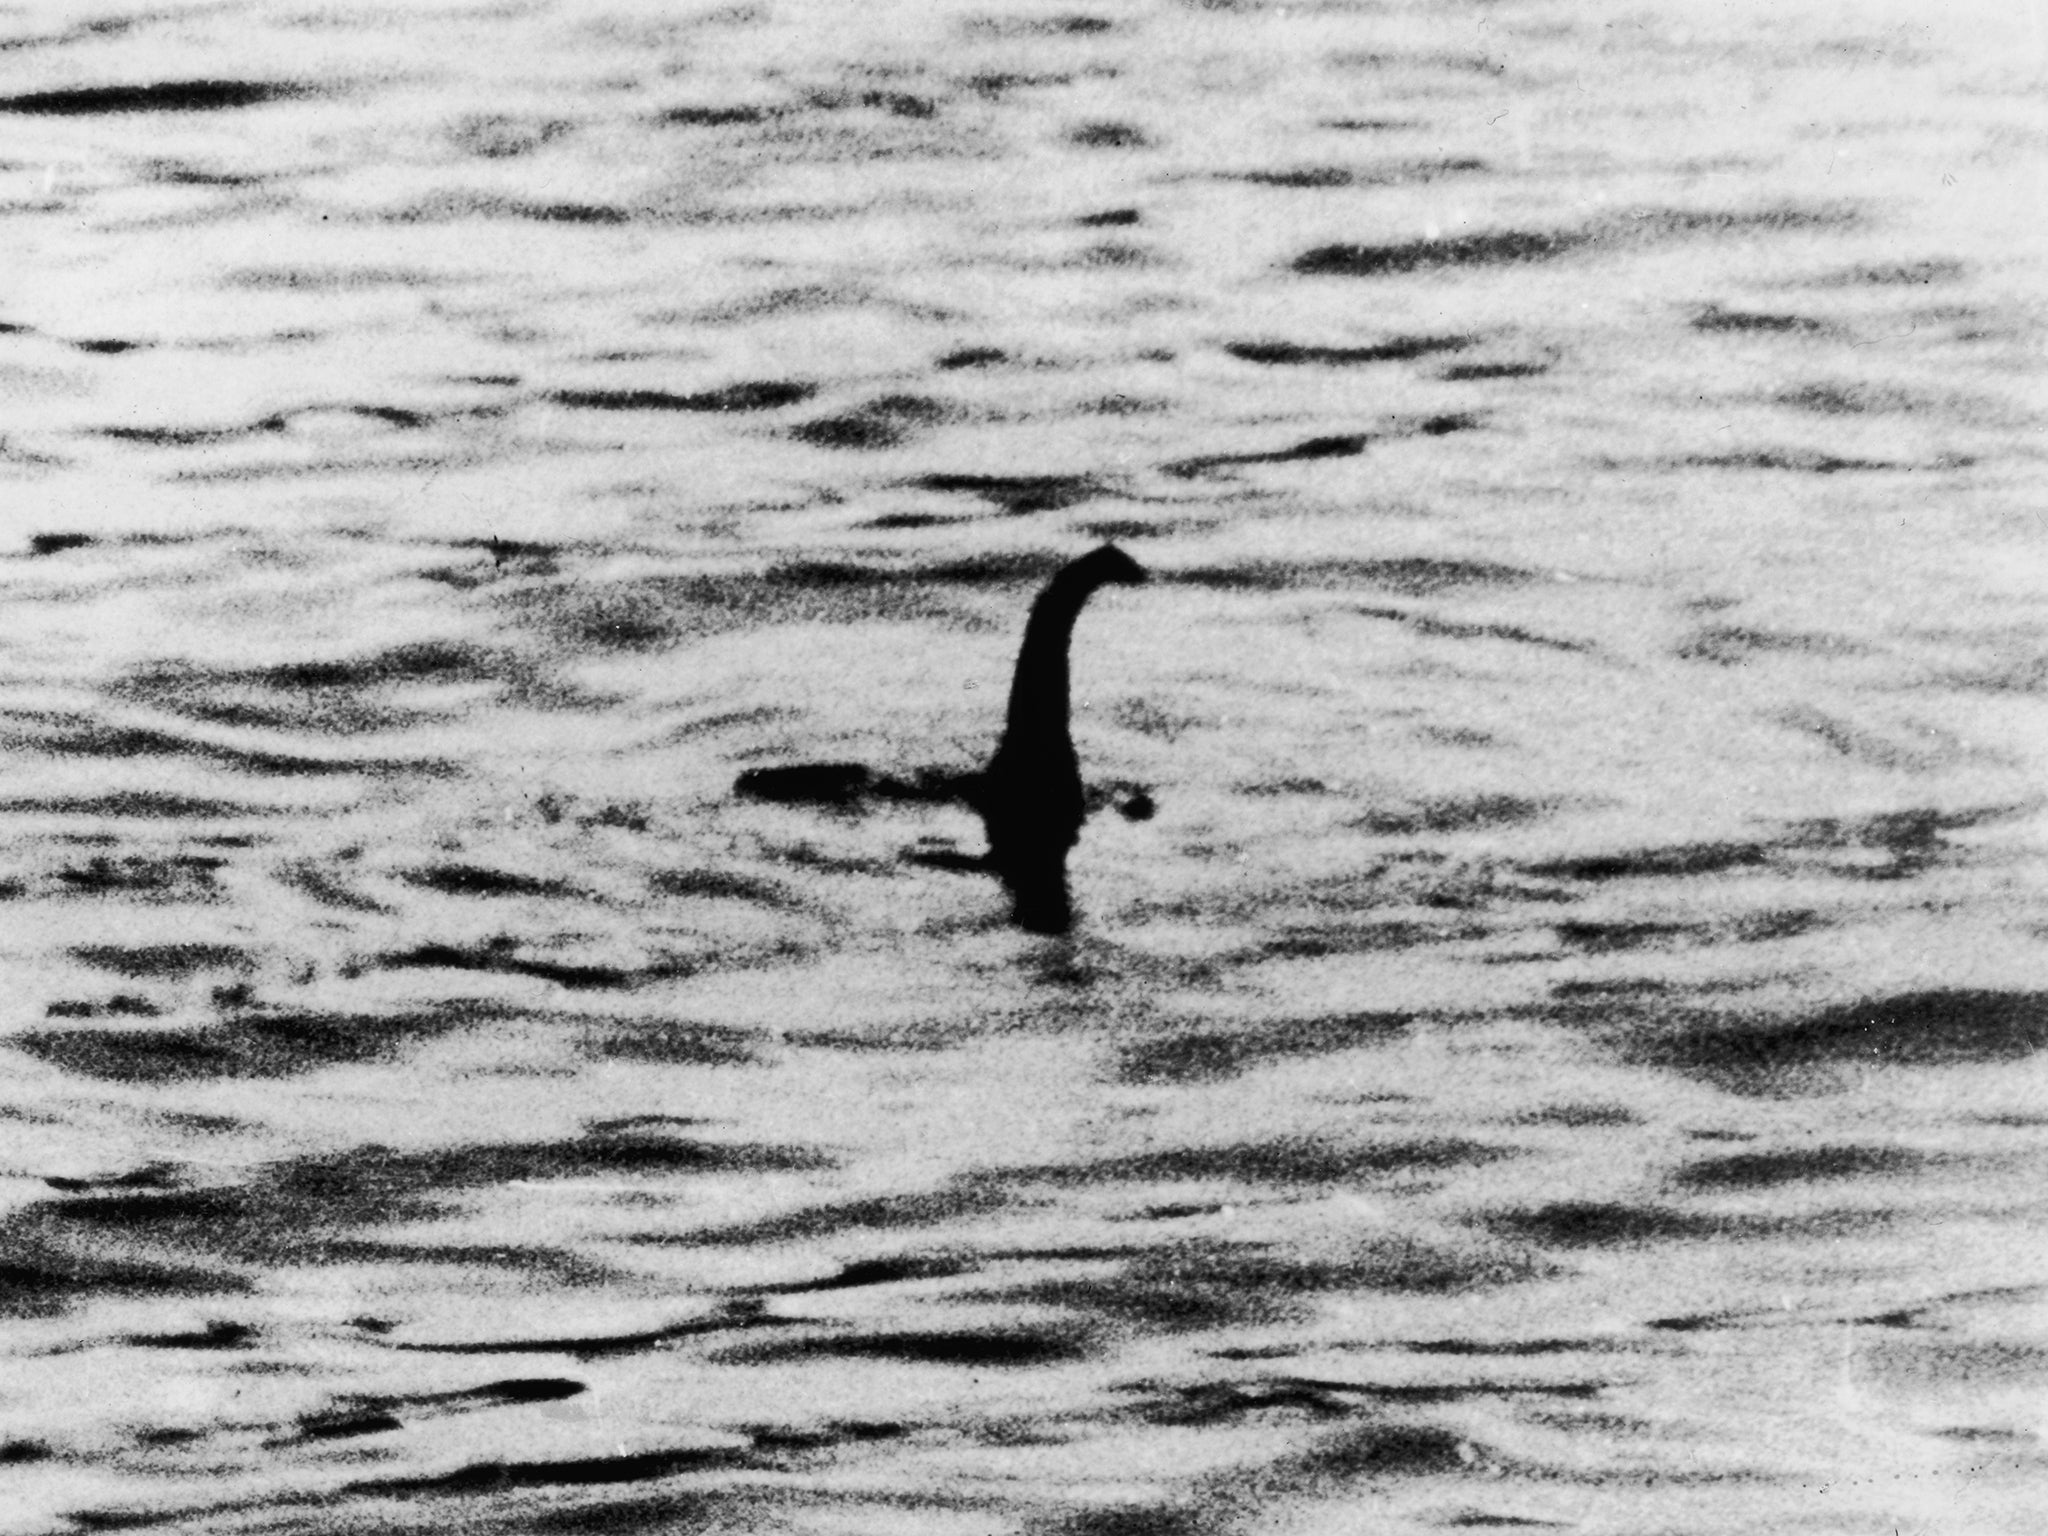 The Daily Mail published a photo purportedly of the Loch Ness monster in 1934